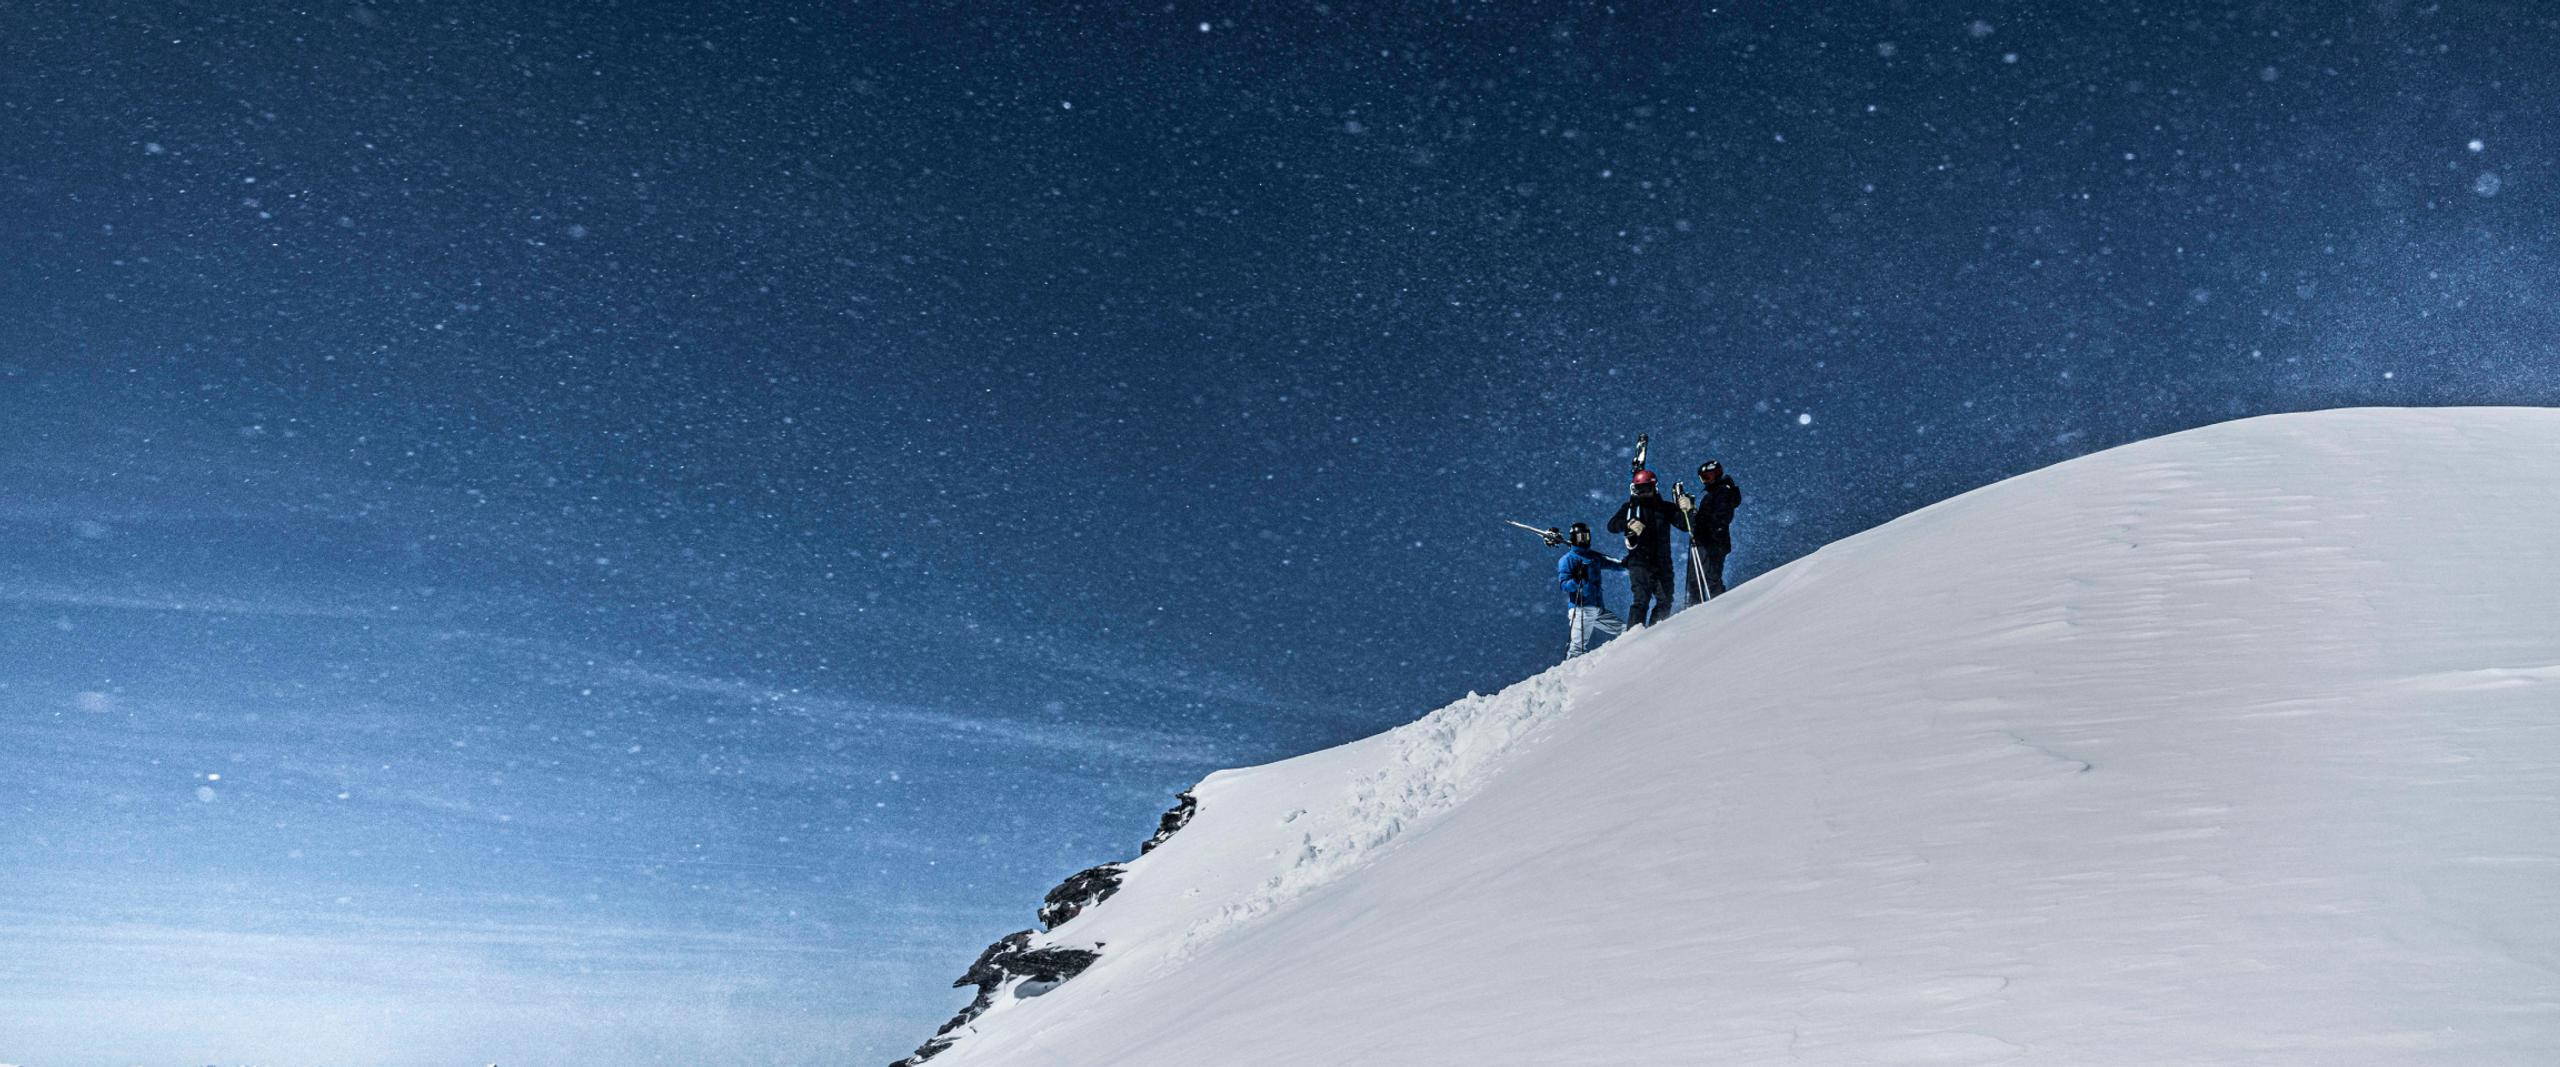 Three people standing with skis on a snowy mountain with a blue starry sky in the background